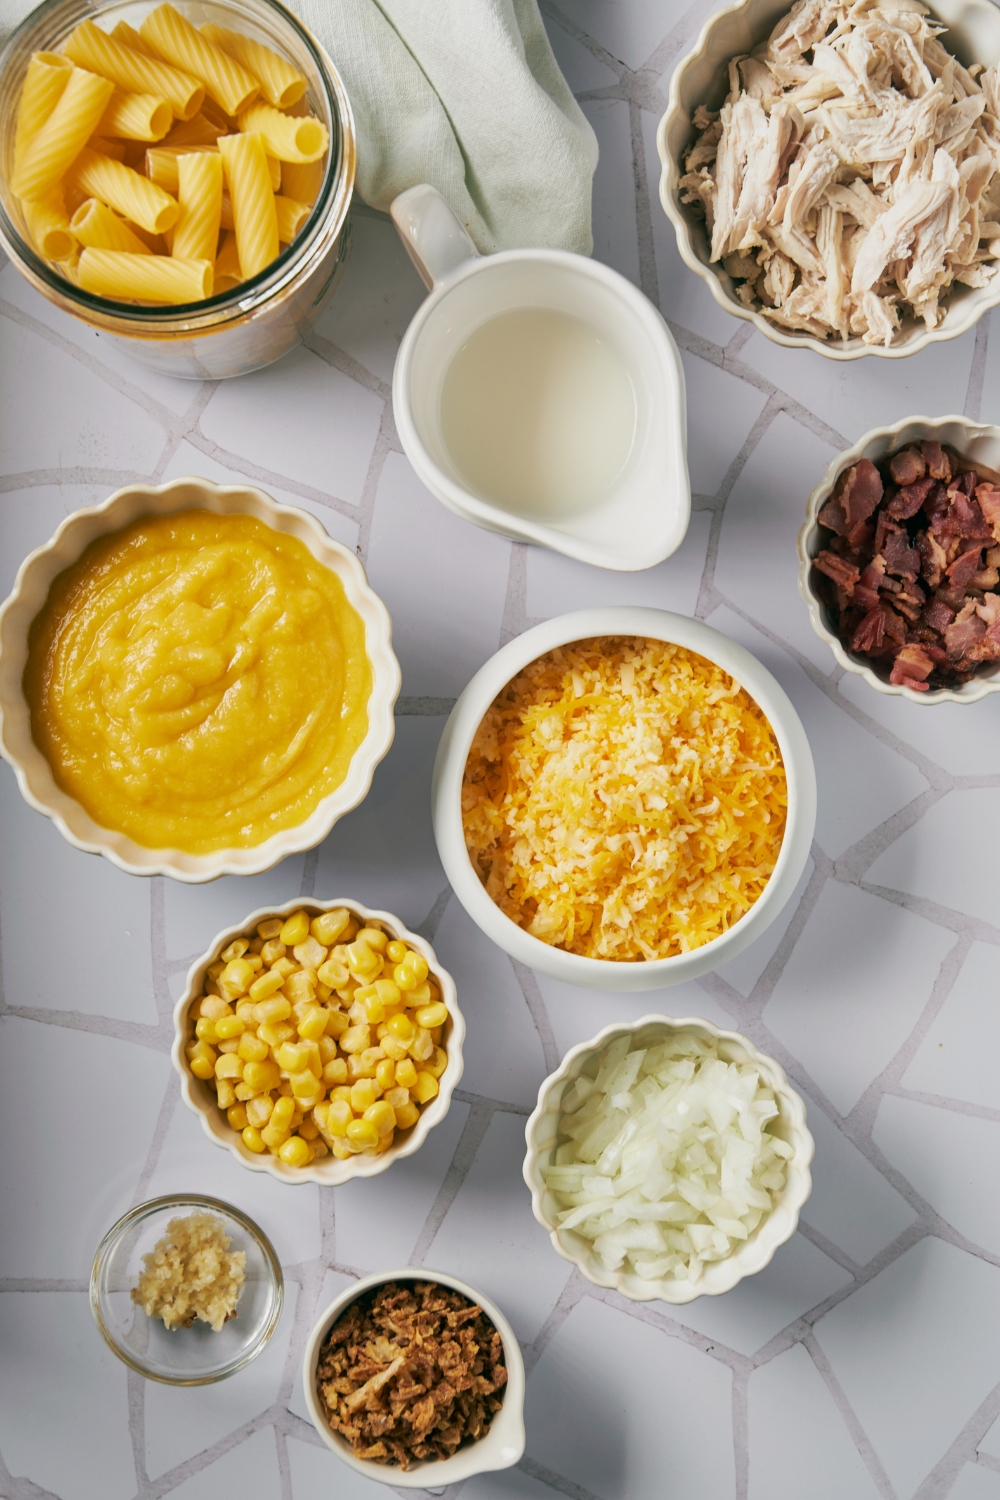 An assortment of ingredients including bowls of shredded cheese, diced onion, bacon, shredded chicken, dried pasta, fresh corn, condensed soup, garlic, and french fried onions.